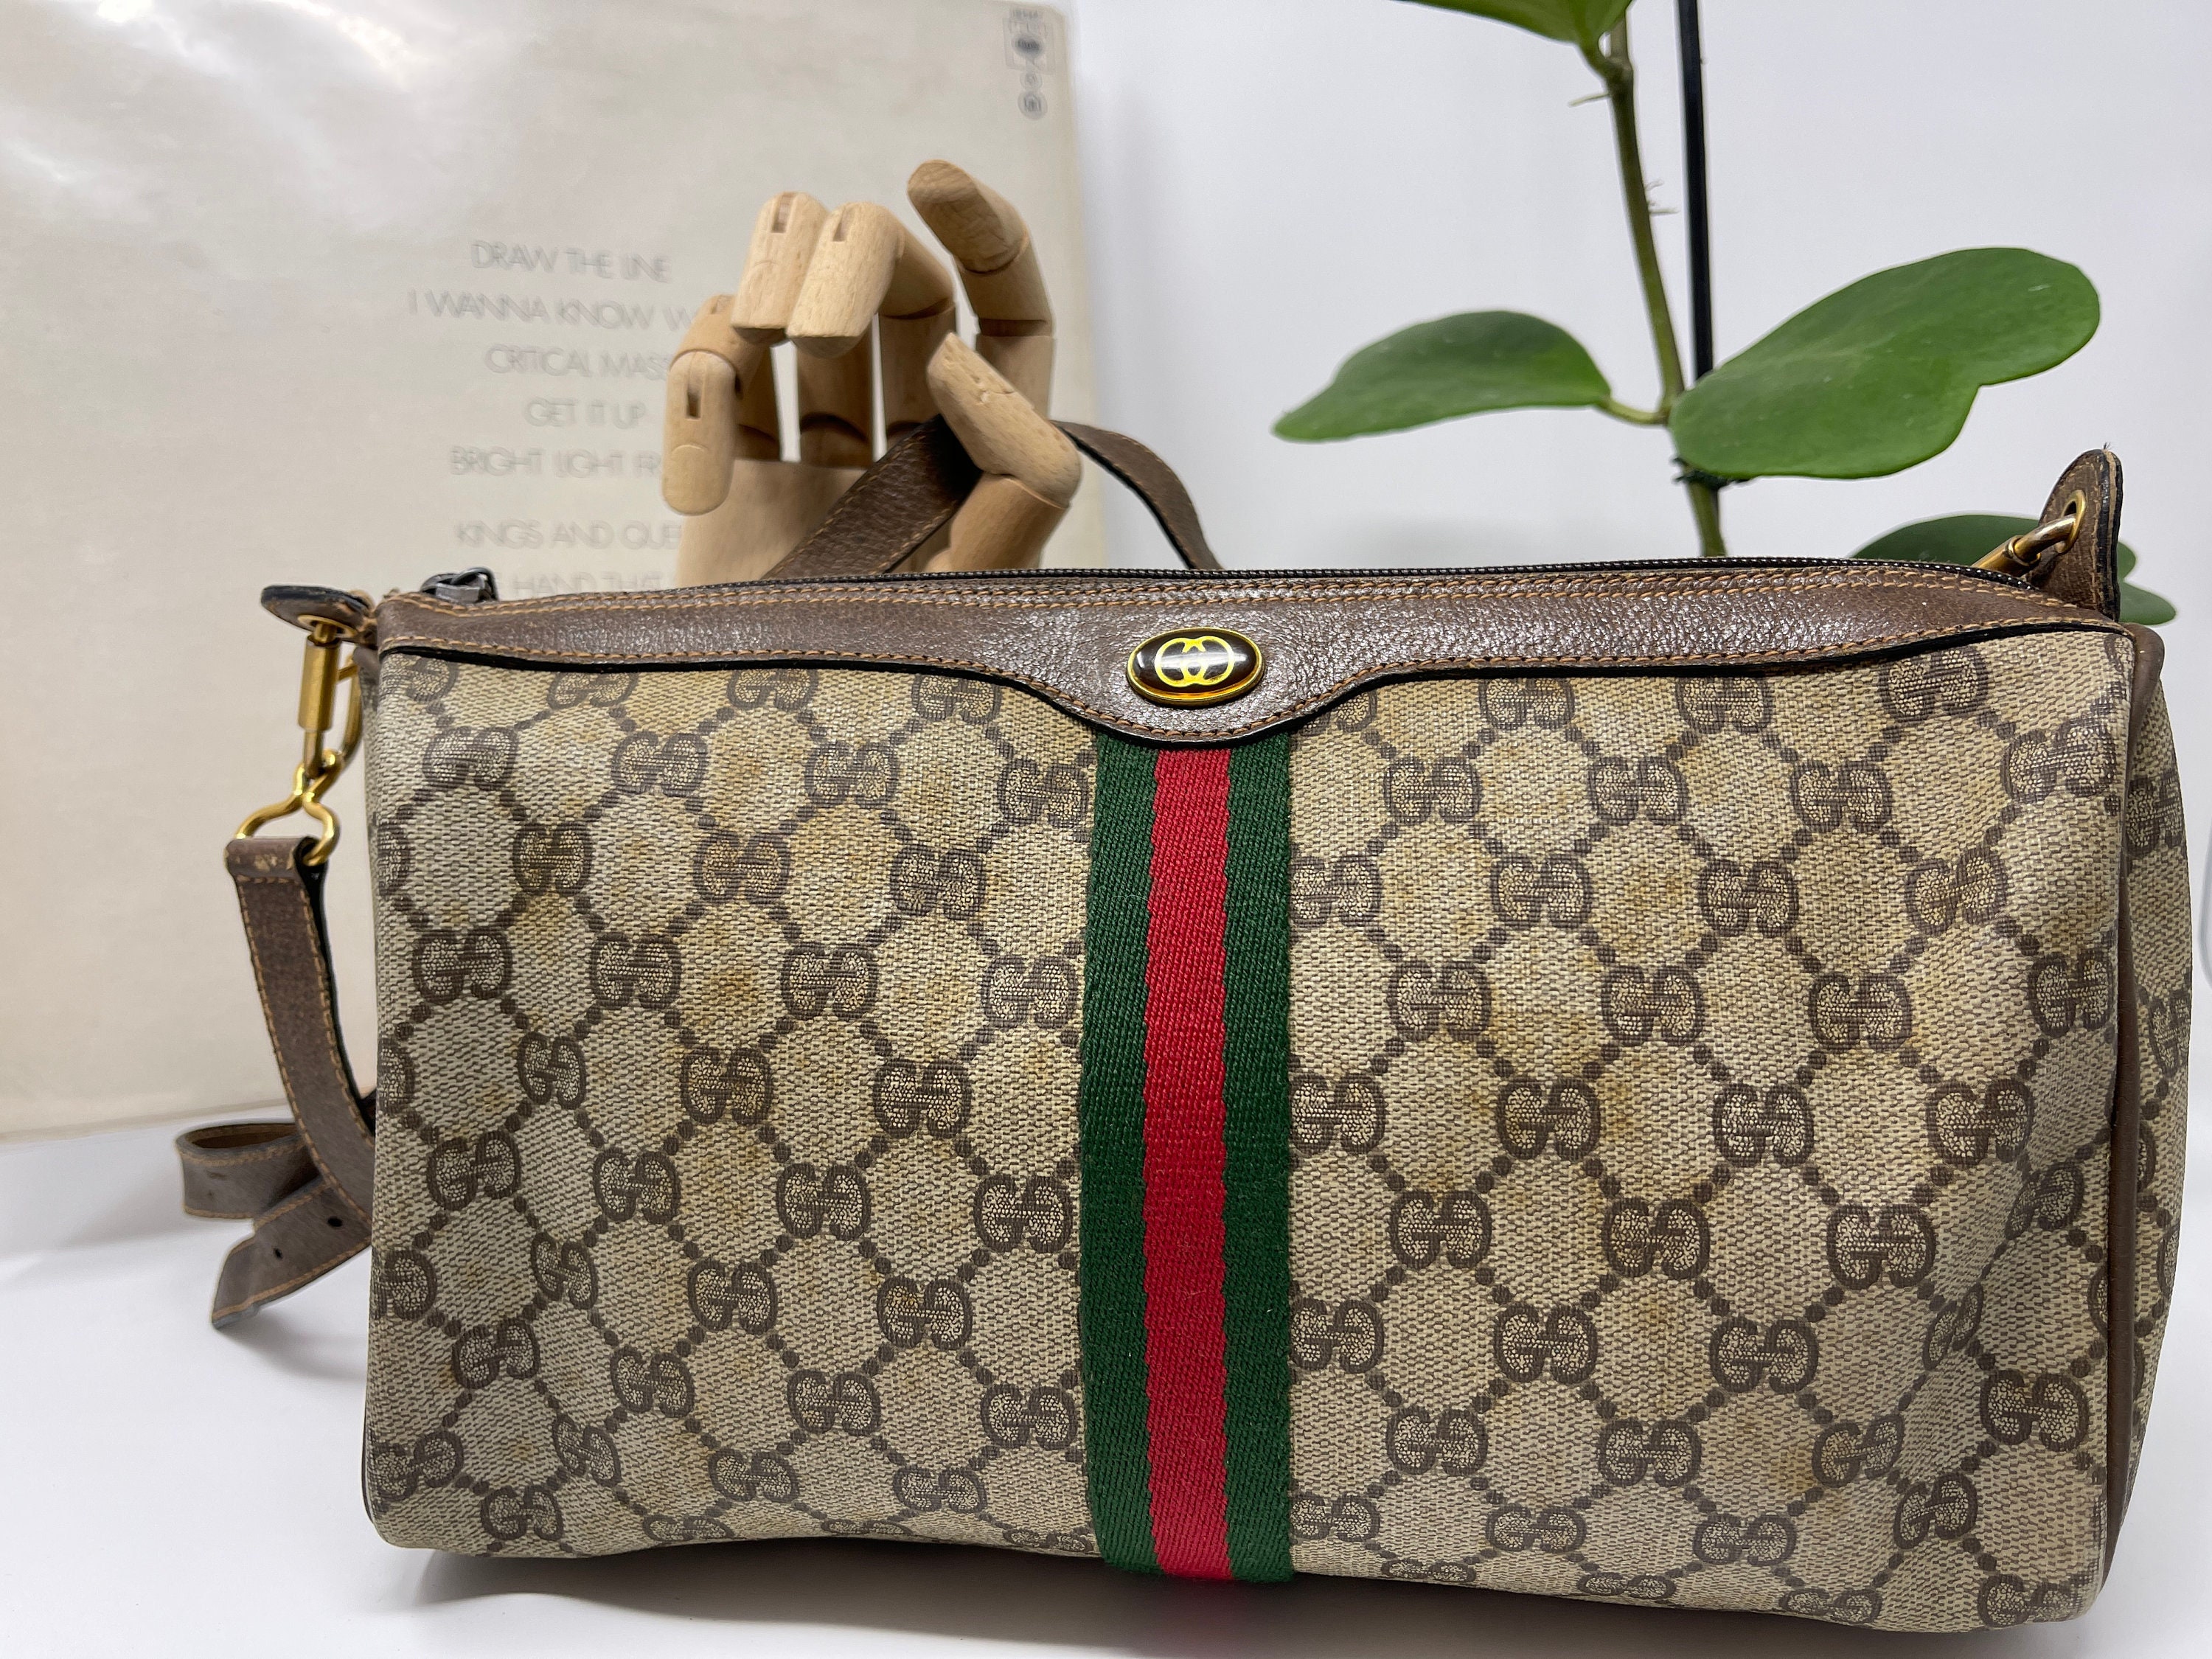 Used Gucci Bag - Etsy